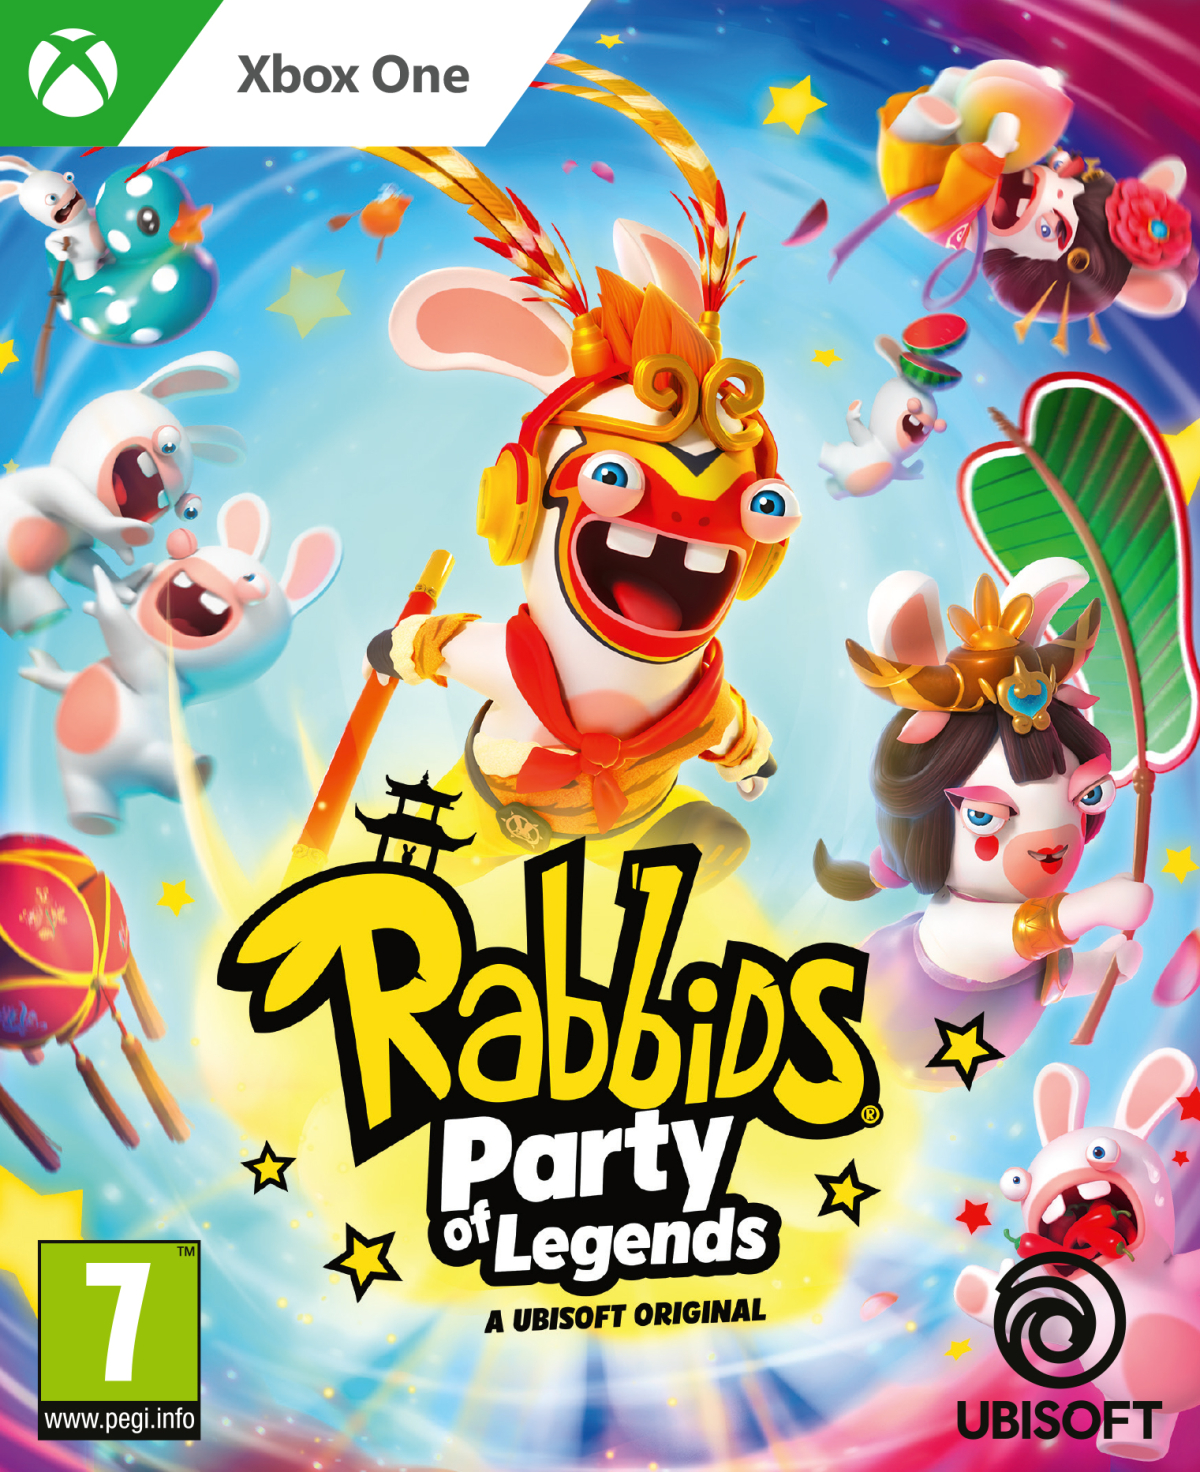 XBOXOne Rabbids Party of Legends